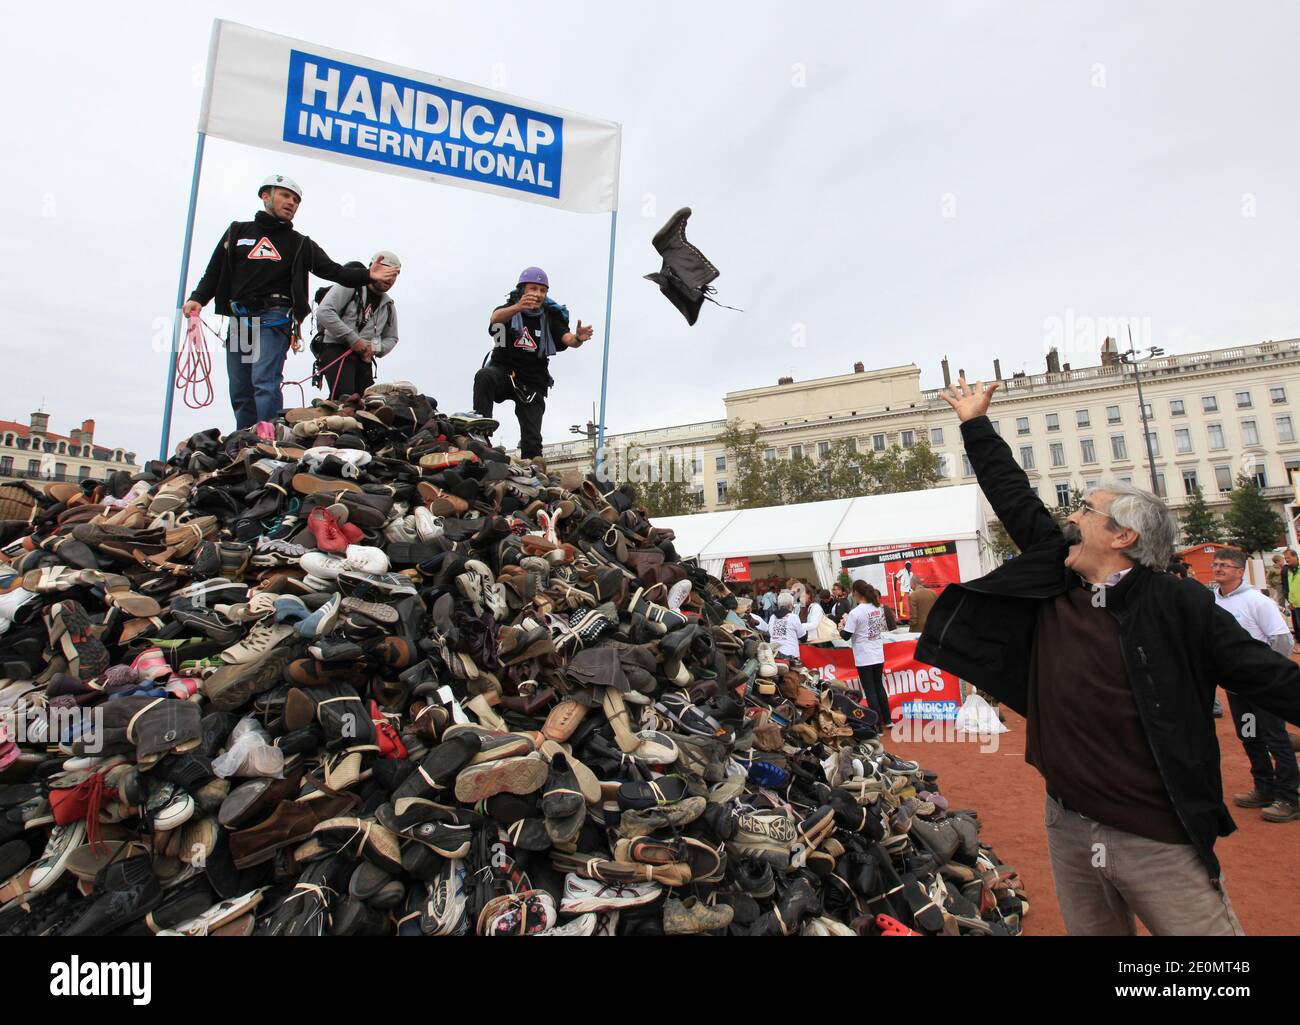 Jean-Baptiste Richardier, Founder of the Handicap International agency and  member of the international campaign for the ban on antipersonnel land  mines organised the pyramid of shoes at Bellecour square in Lyon, France